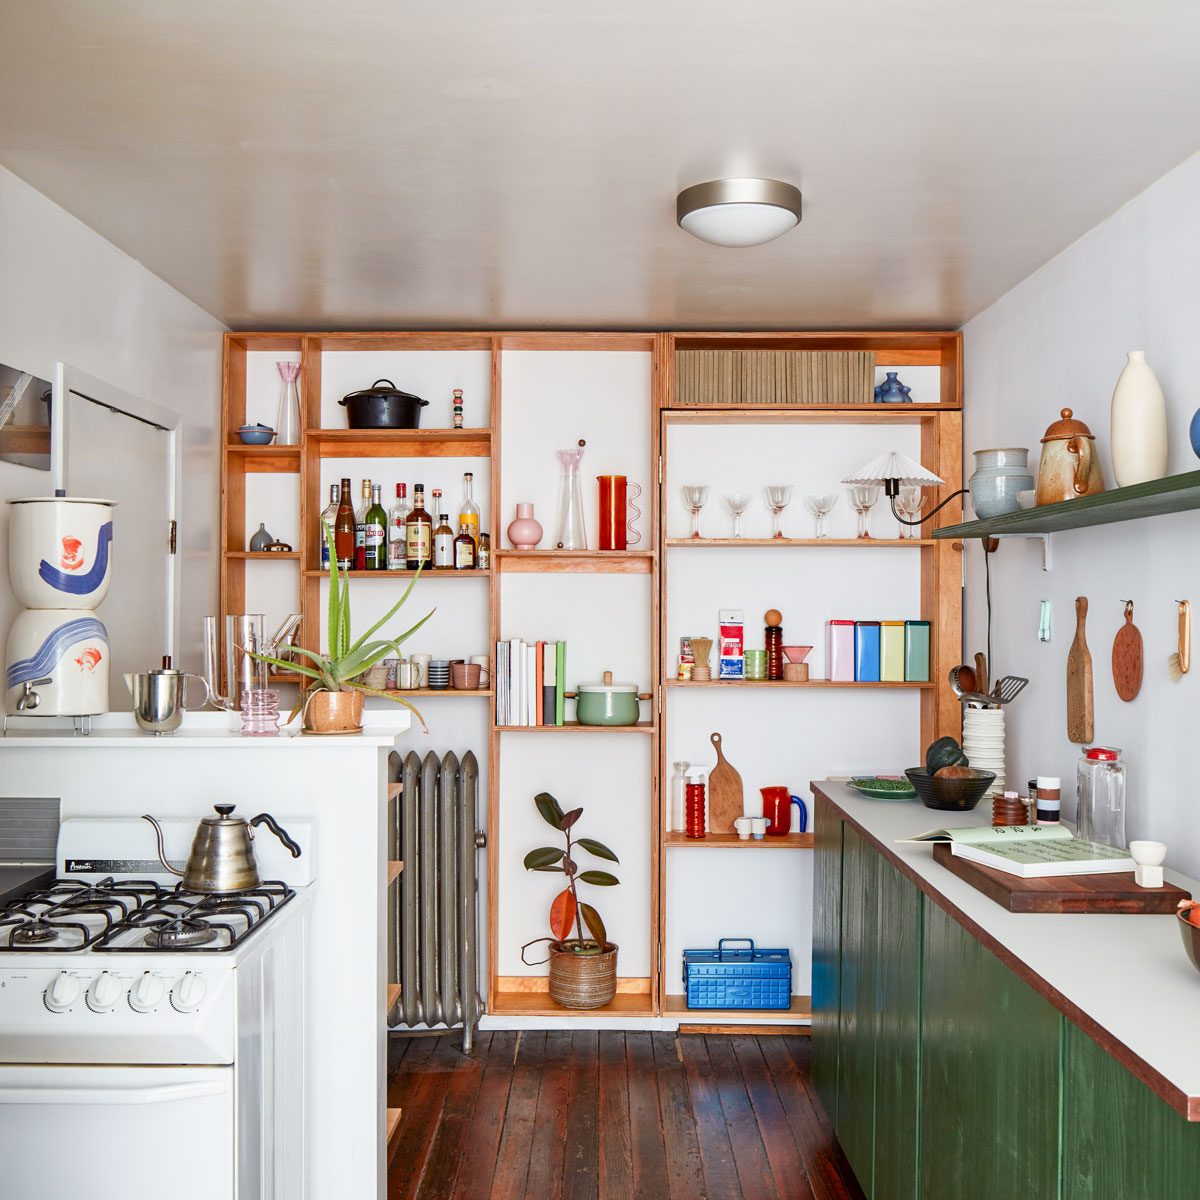 https://www.rd.com/wp-content/uploads/2023/10/a-wall-of-shelves-in-kitchen-room-GettyImages-1250248024_KSedit.jpg?fit=700%2C700